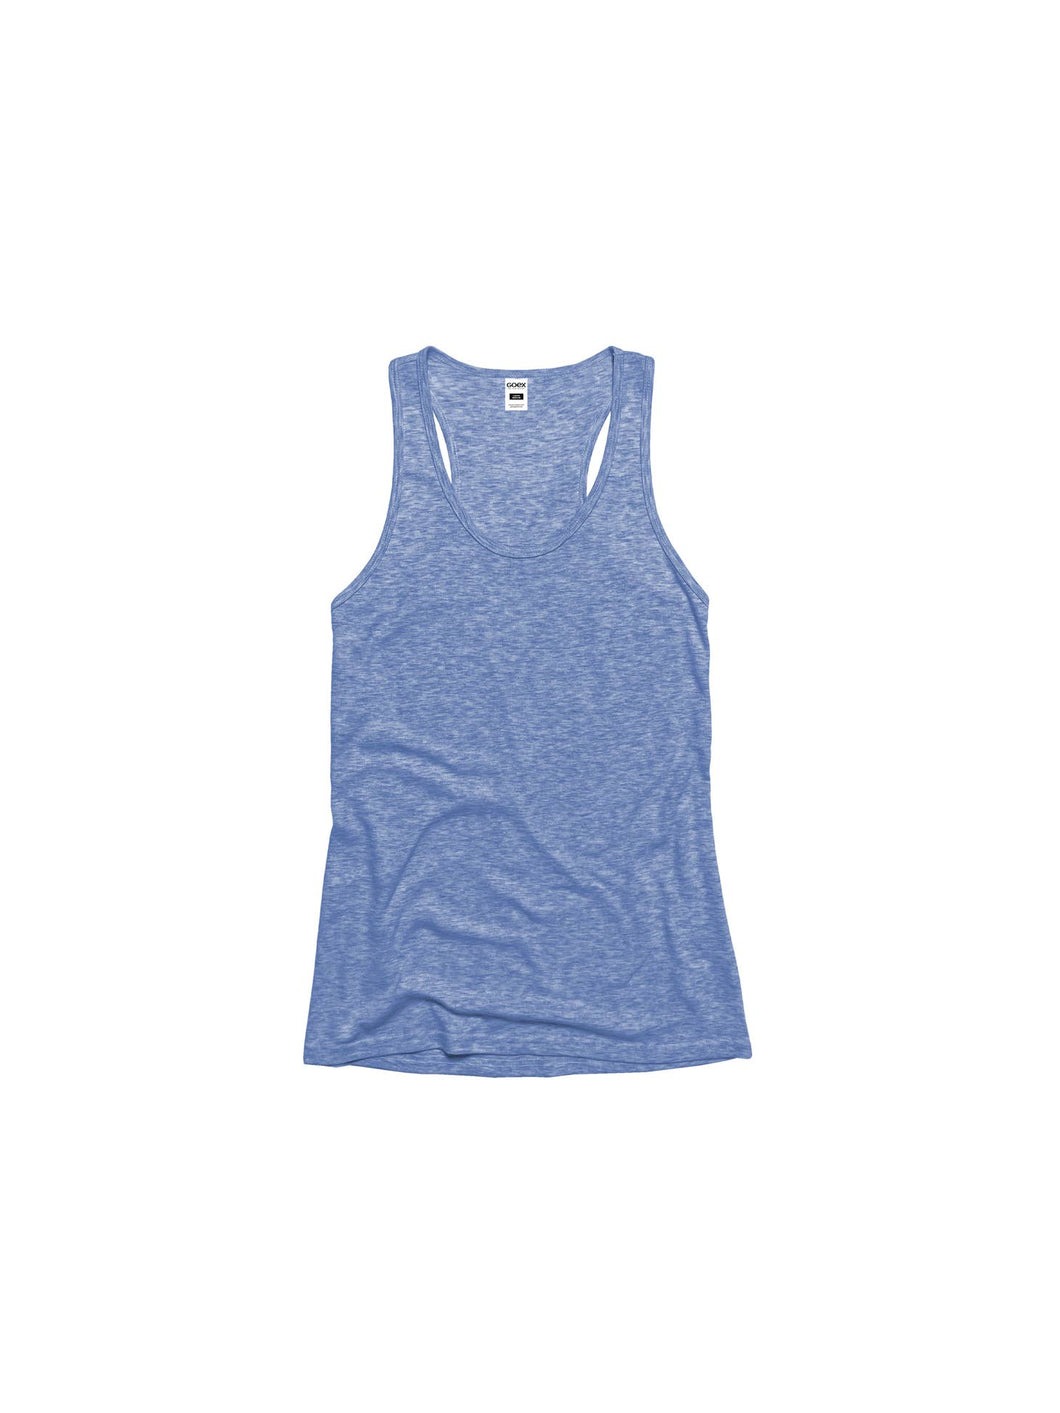 GOEX Eco-Triblend Tank *Multiple Colors Available*